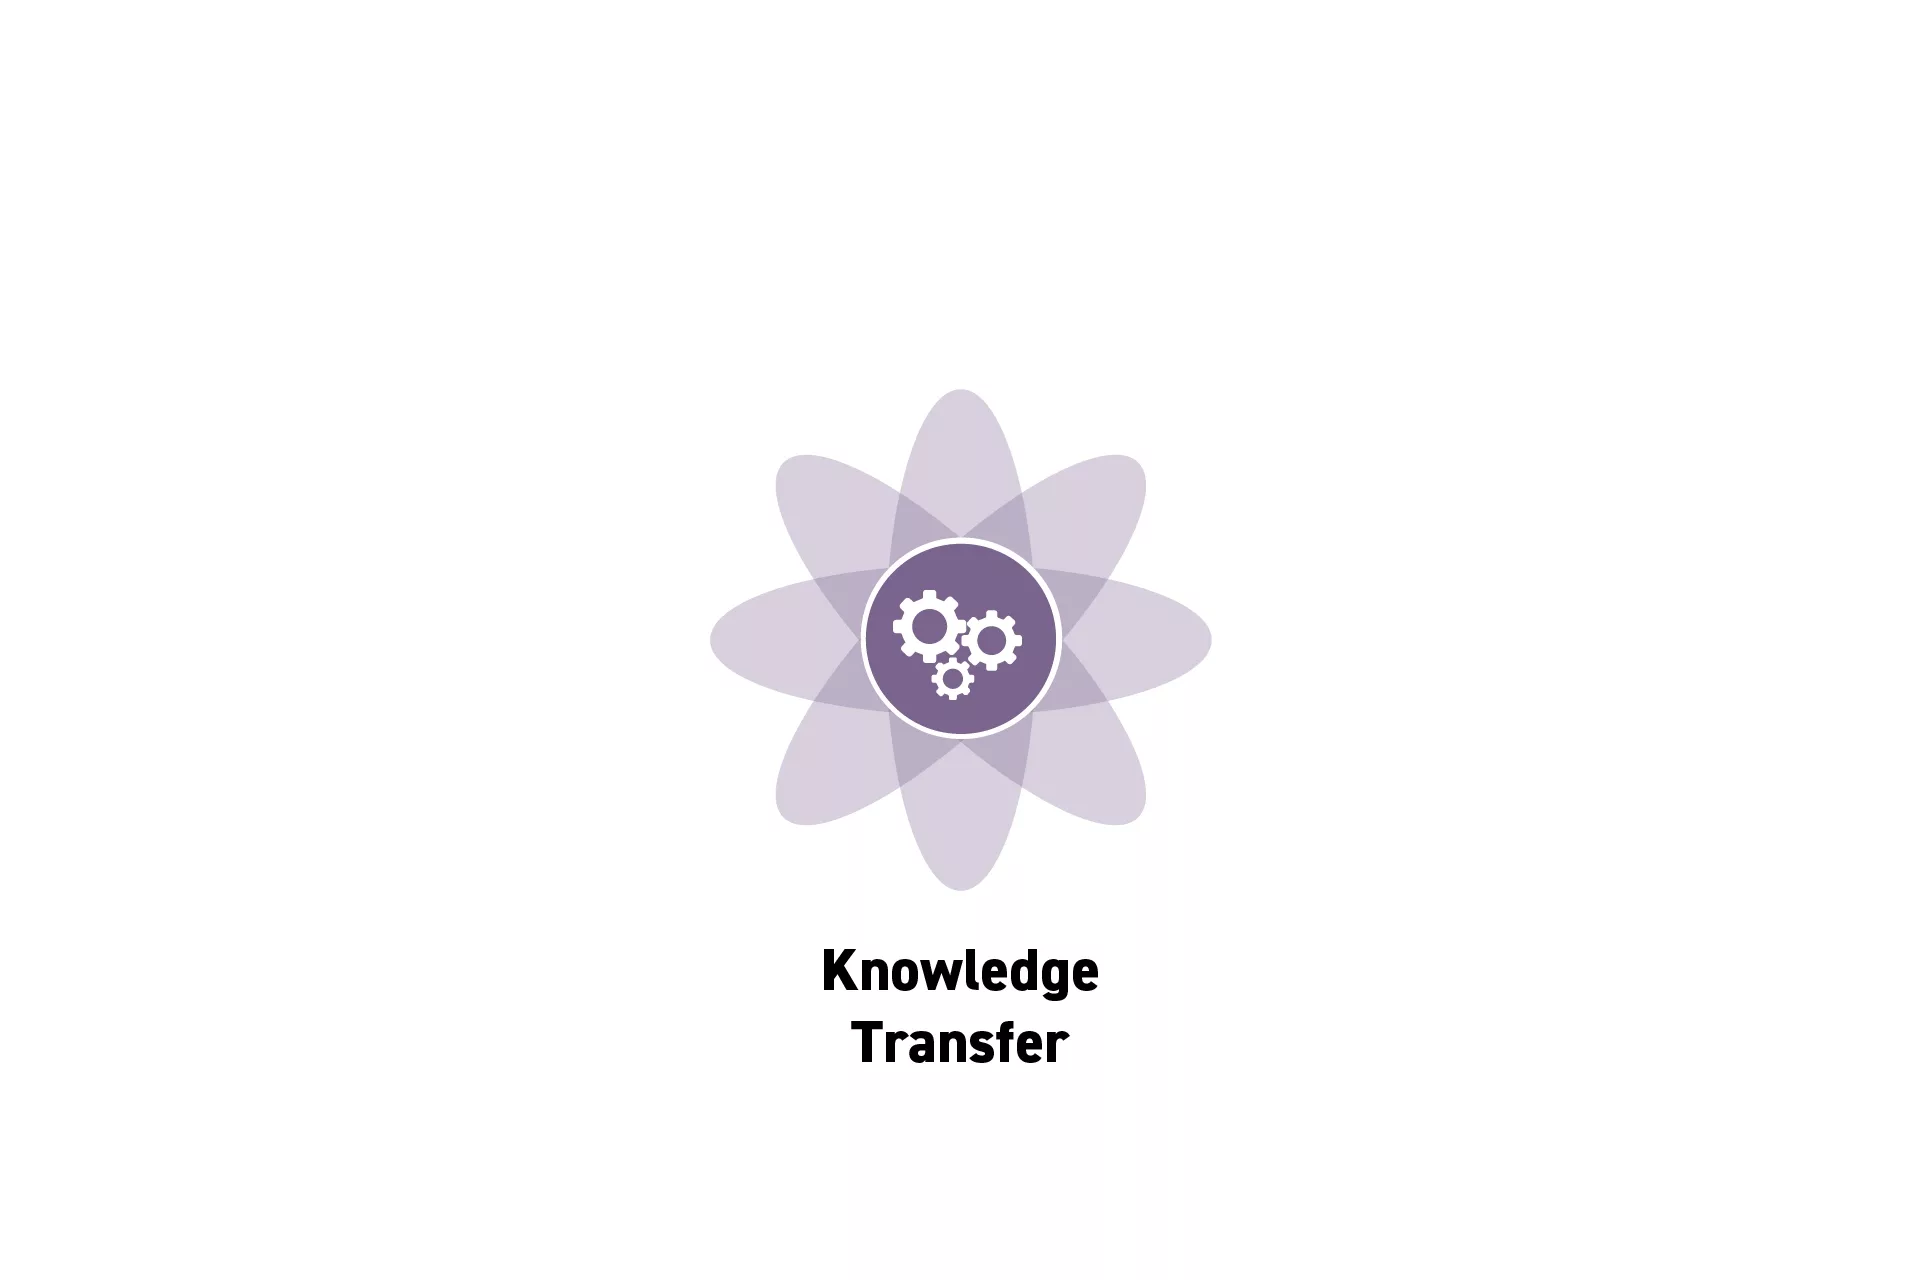 <p>A flower that represents Project Management with the text "Knowledge Transfer" beneath it.</p>